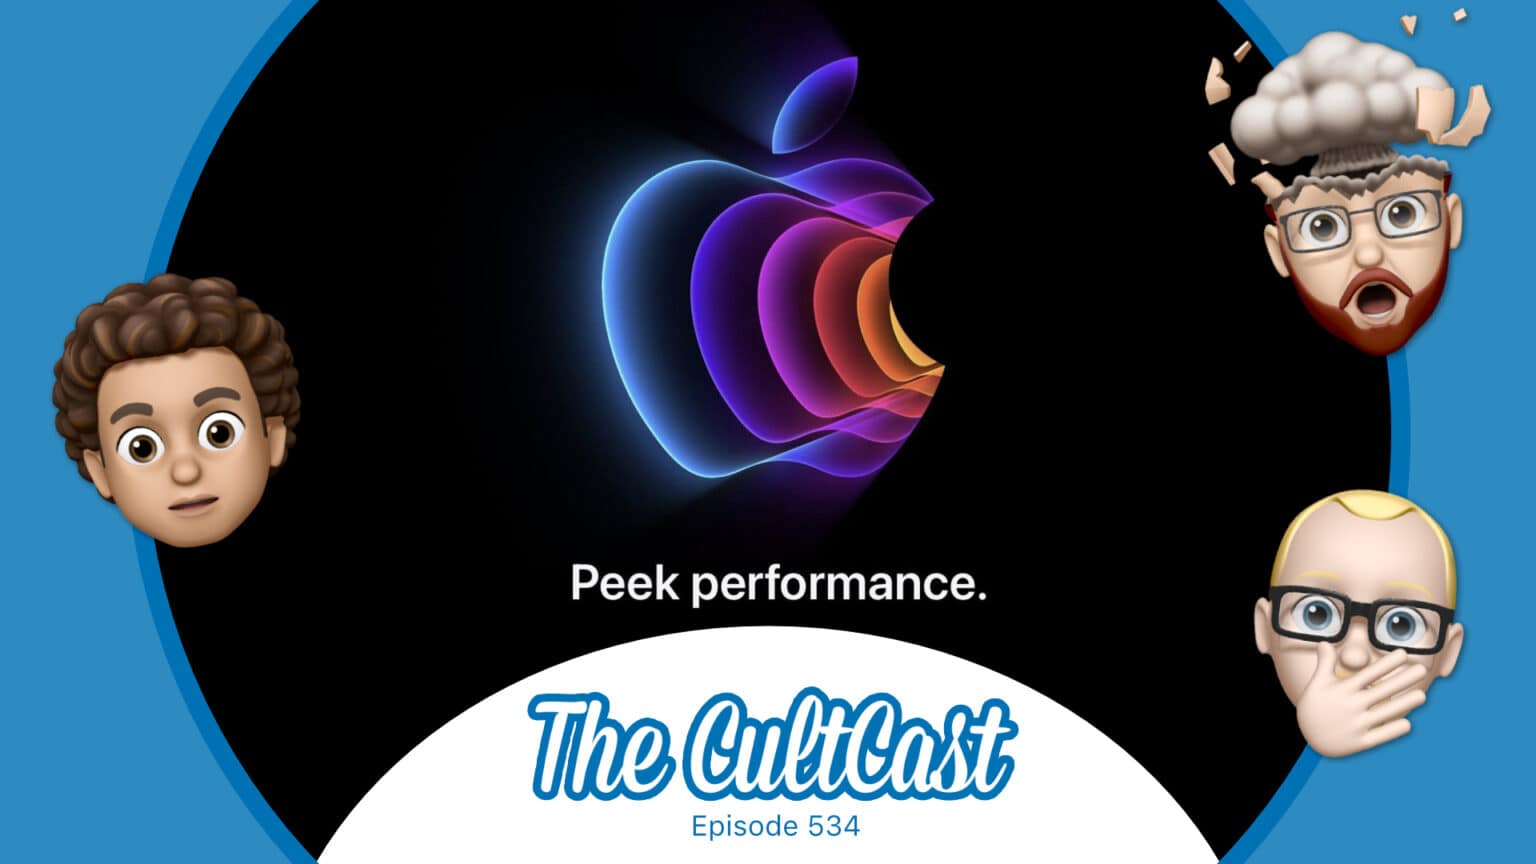 Apple Peek Performance event predictions March 8: Here comes the first new Apple gear of 2022.